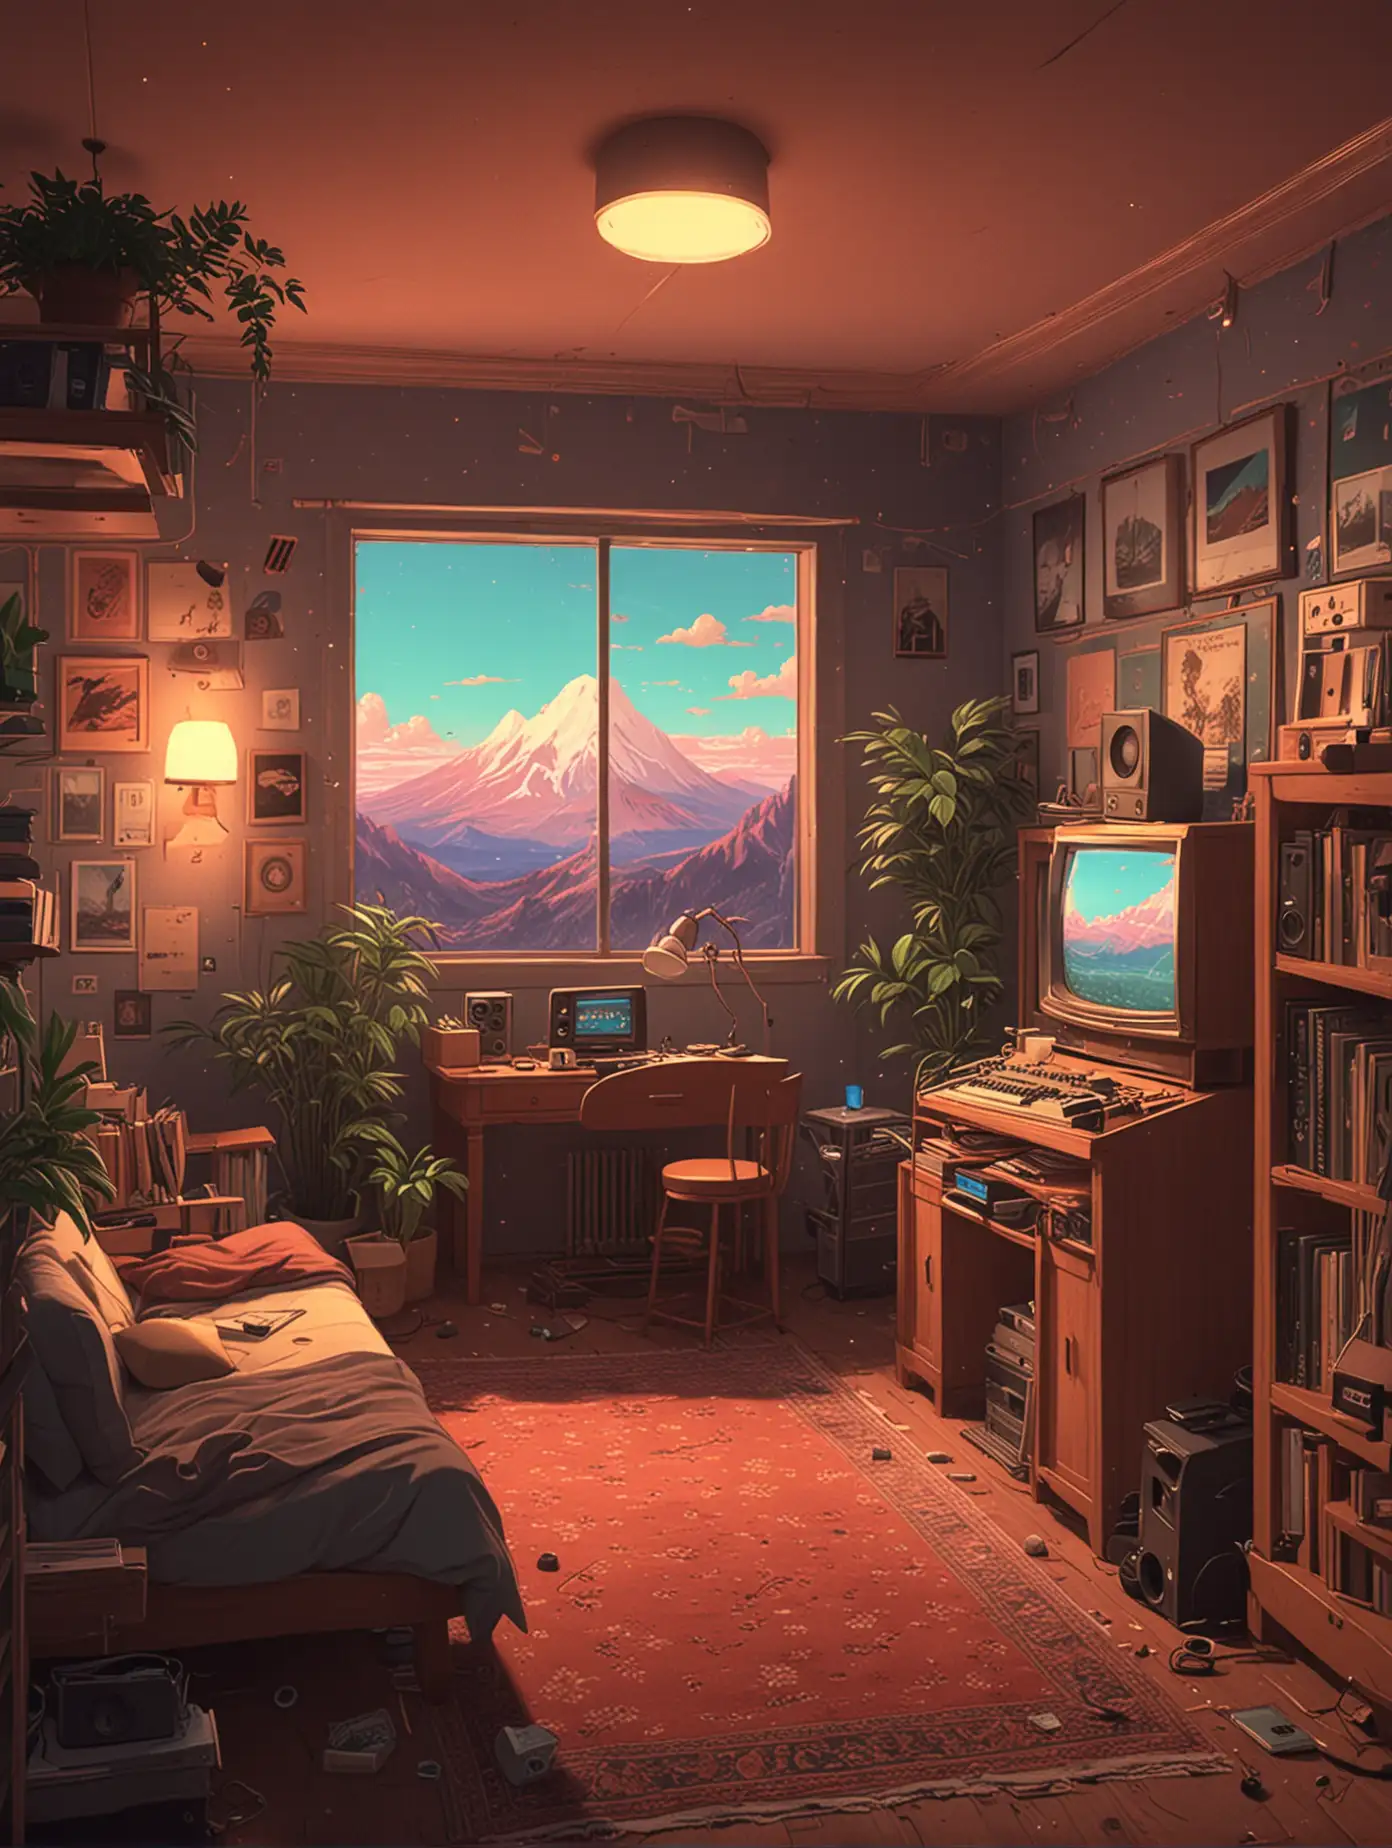 Cozy-Lofi-Room-Wallpaper-with-Vintage-Vinyl-Player-and-Soft-Ambient-Lighting